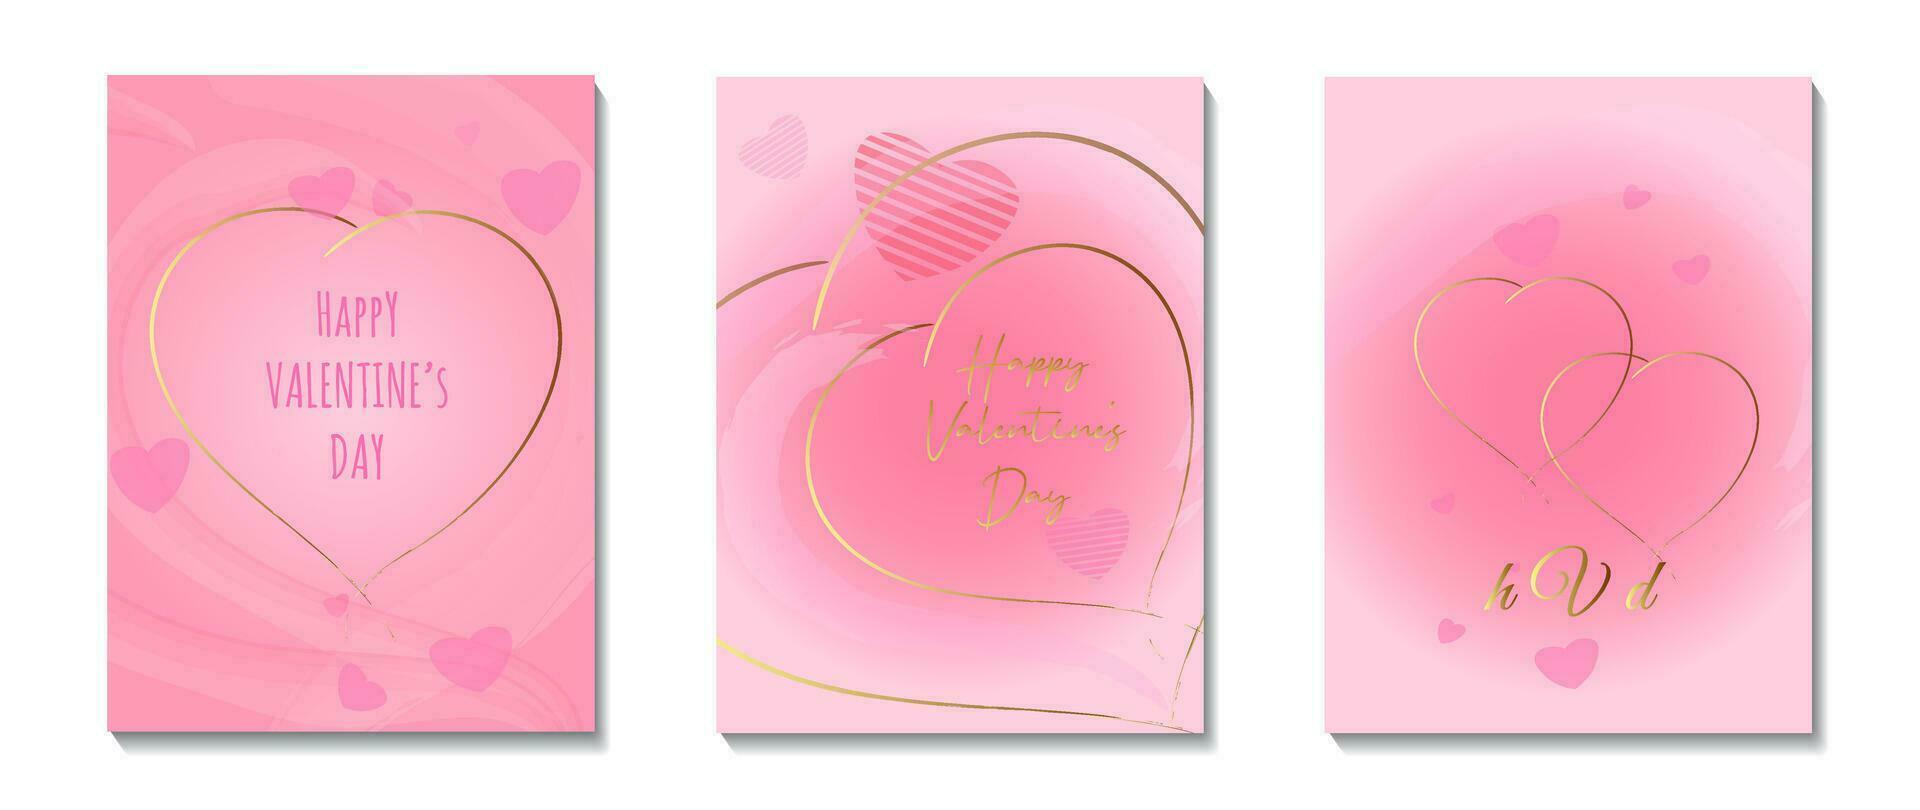 Valentines Day greeting card set with hearts. Vector illustration.